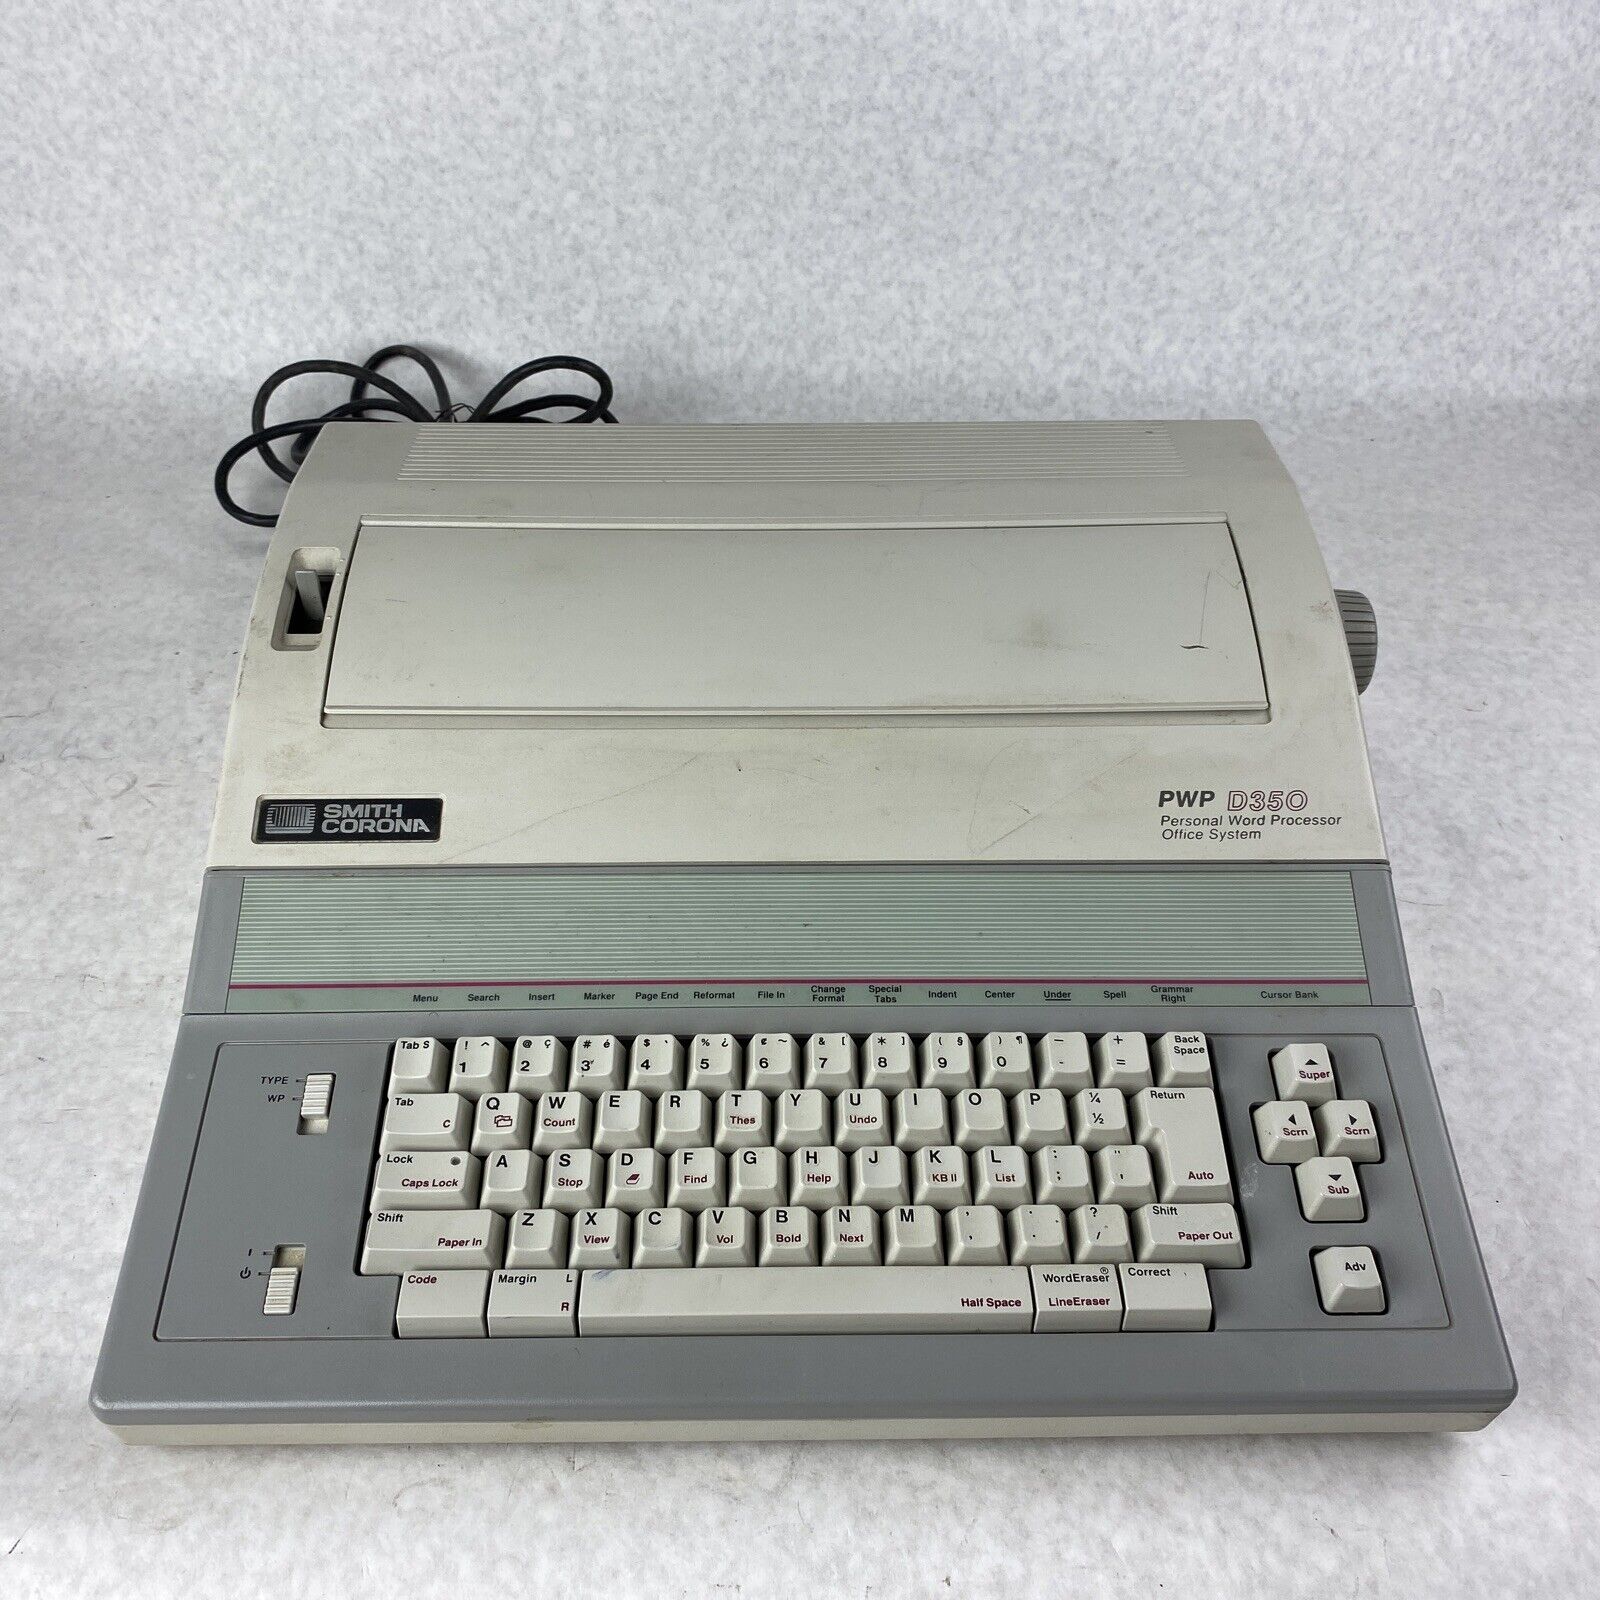 Smith Corona PWP D350 Typewriter -No Accessories or Monitor